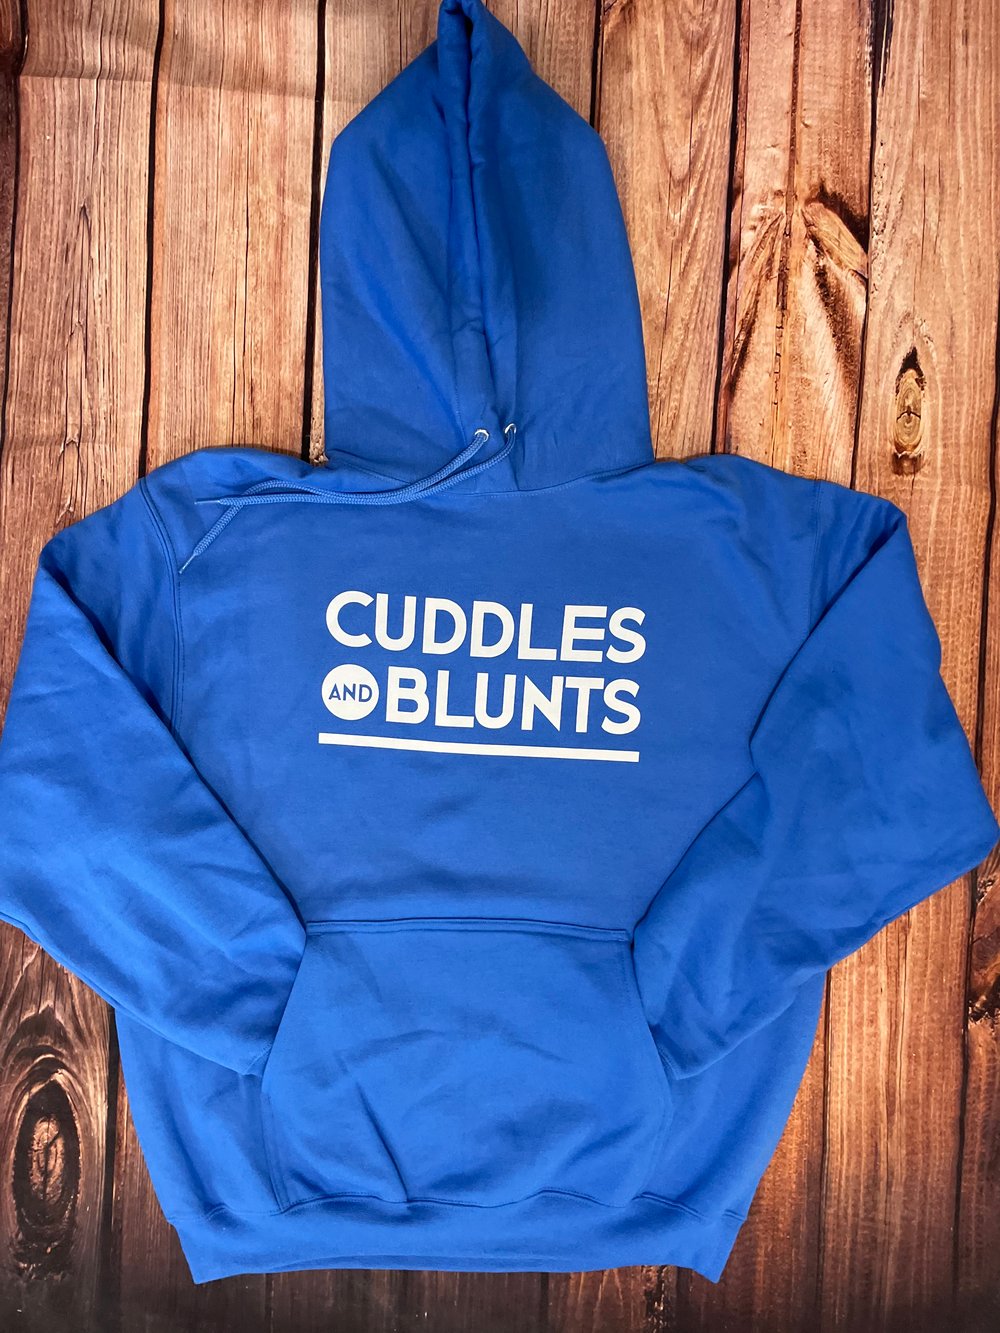 Cuddles and Blunts hoodie (multiple colors available)